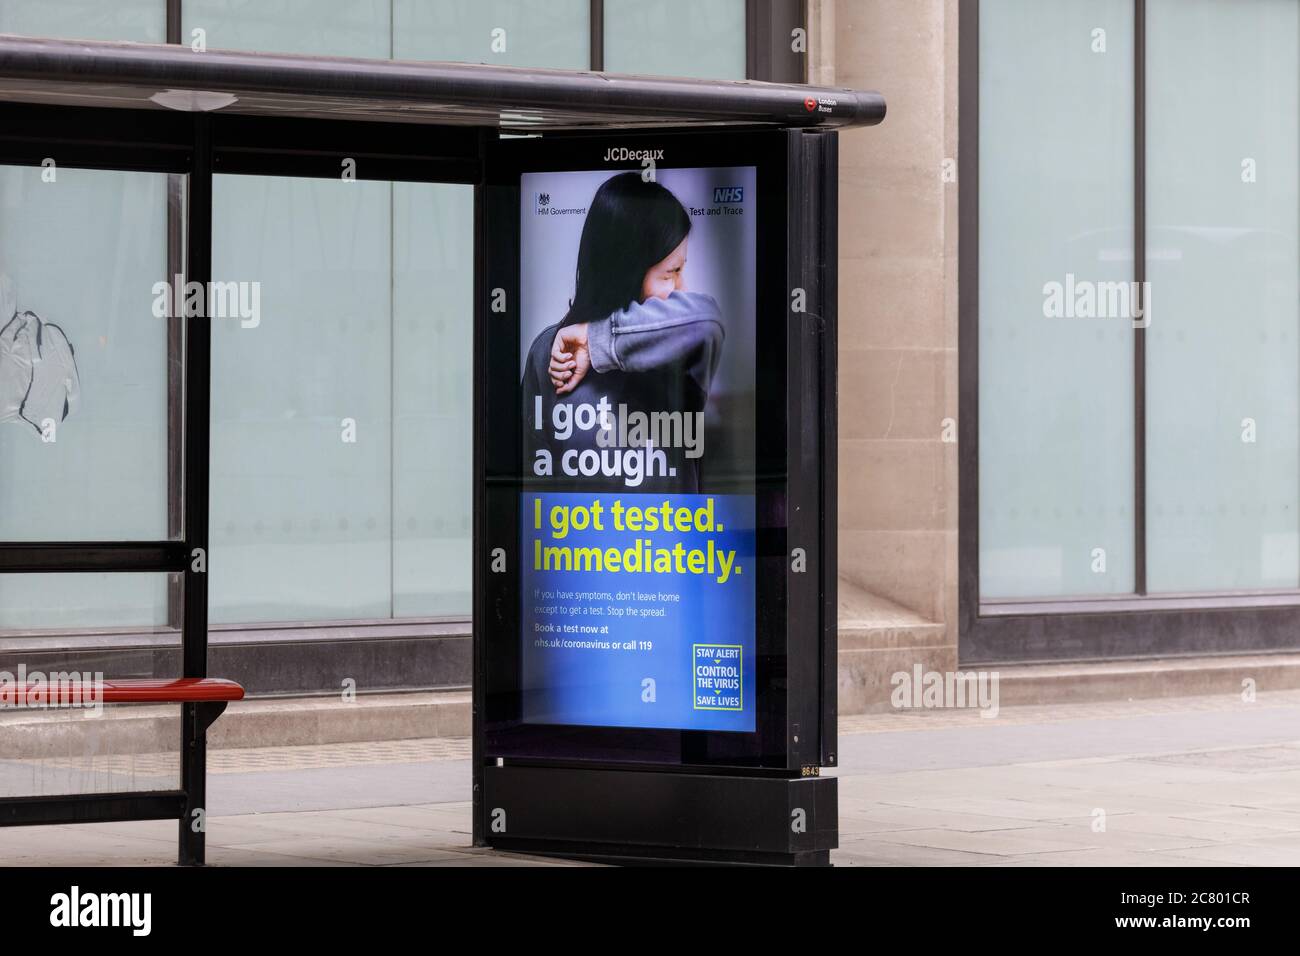 Government sponsored covid-19 coronavirus safety advert for testing on a bus stop, Westminster, London, England, UK Stock Photo